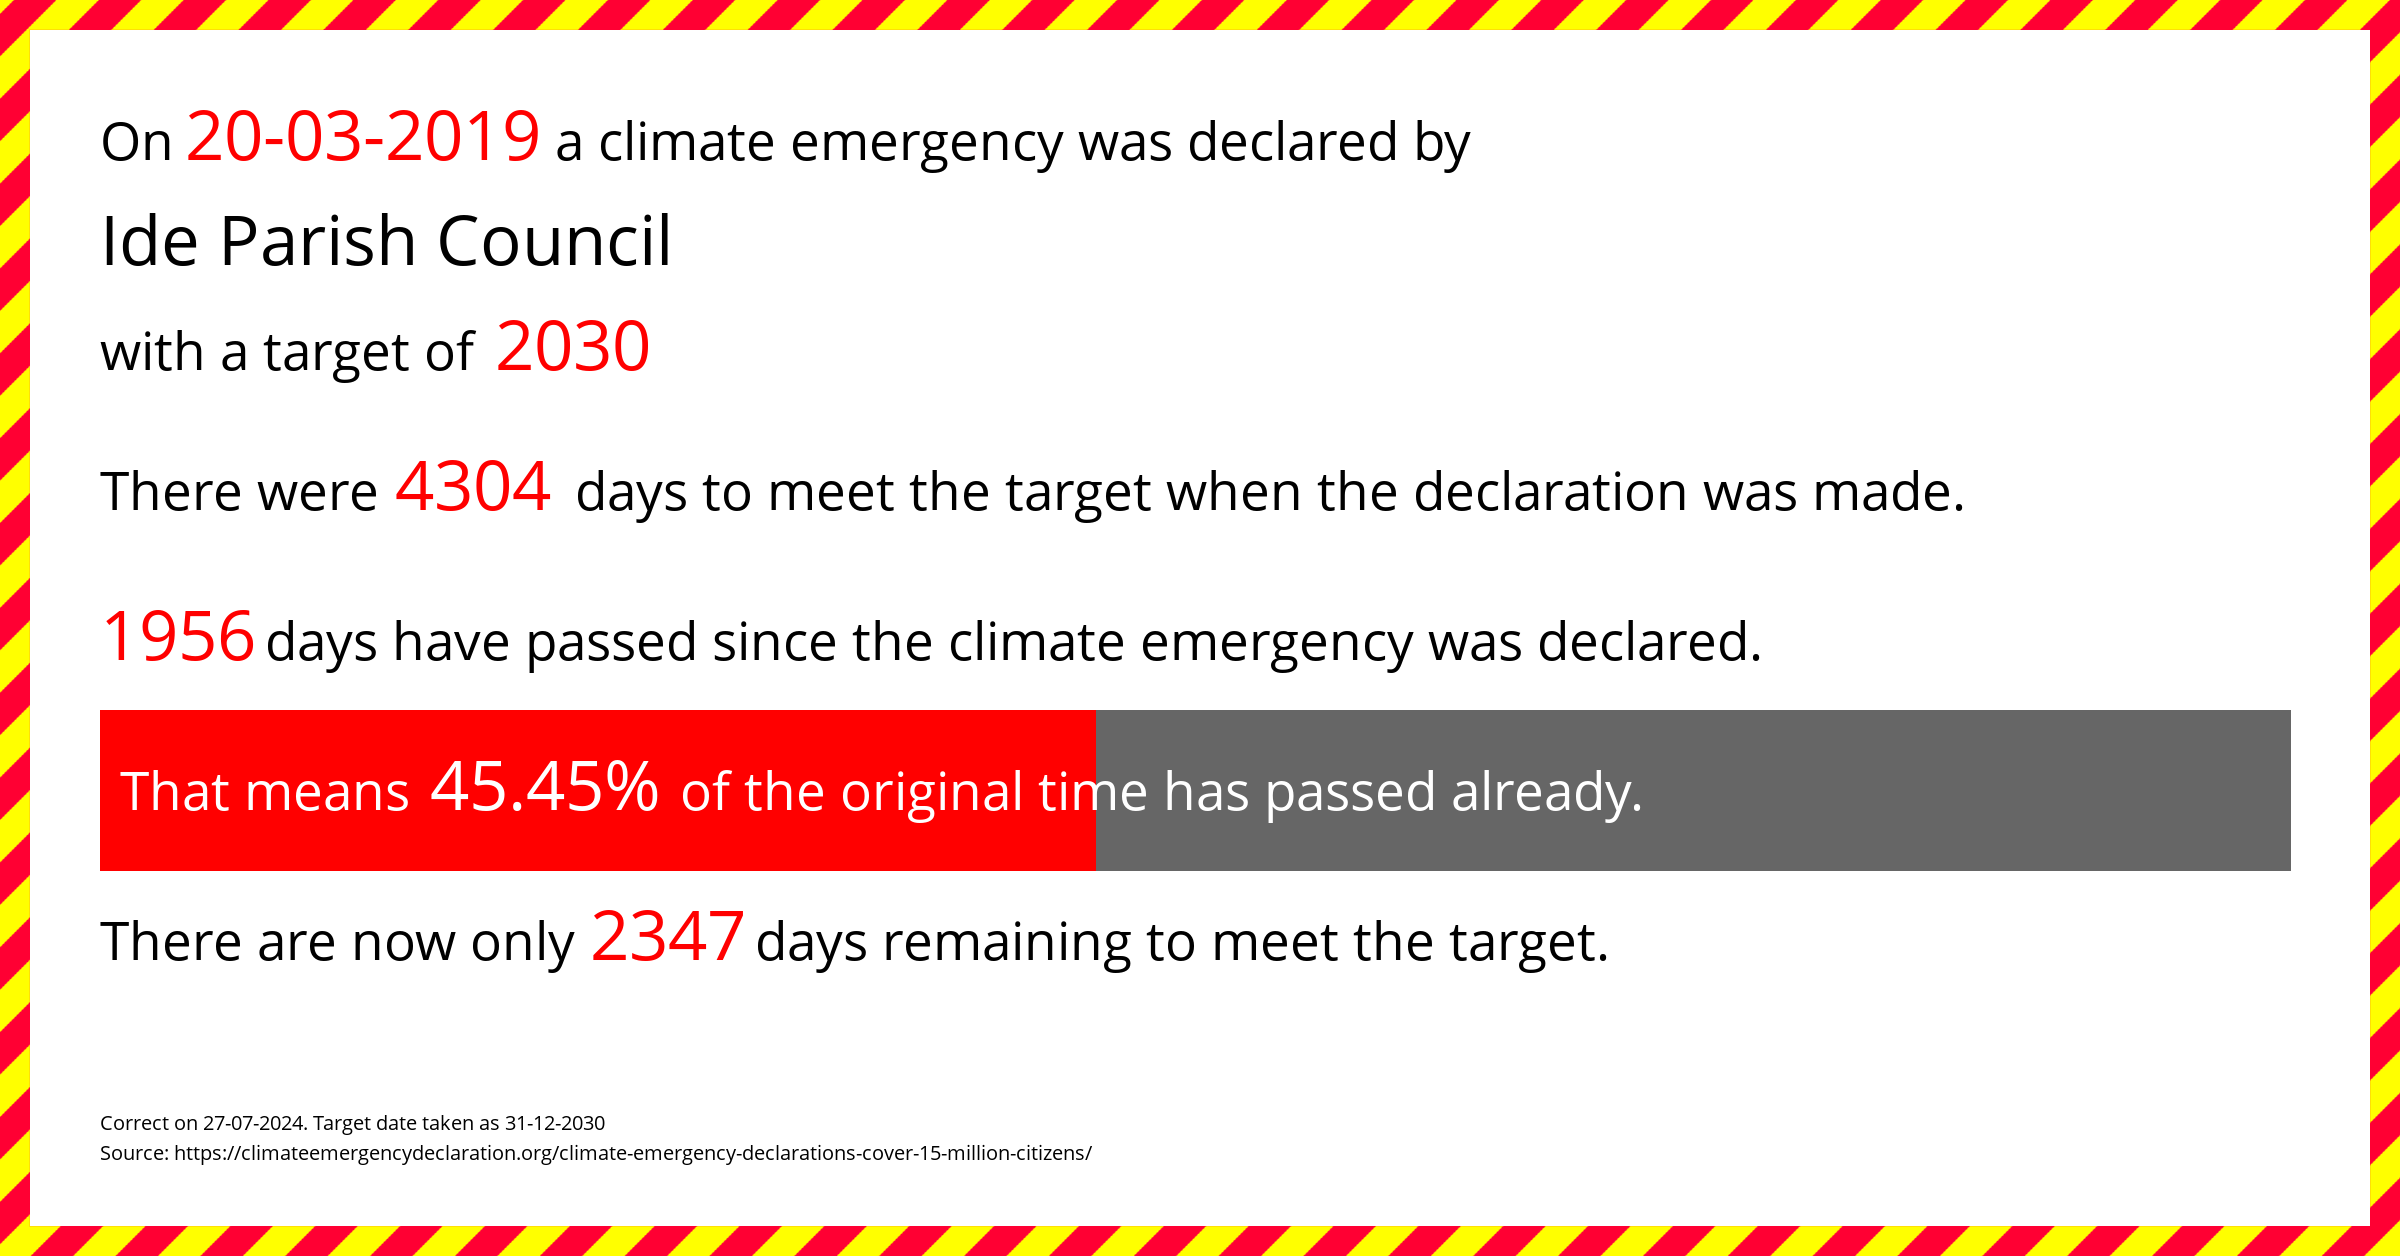 Ide Parish Council declared a Climate emergency on Wednesday 20th March 2019, with a target of 2030.